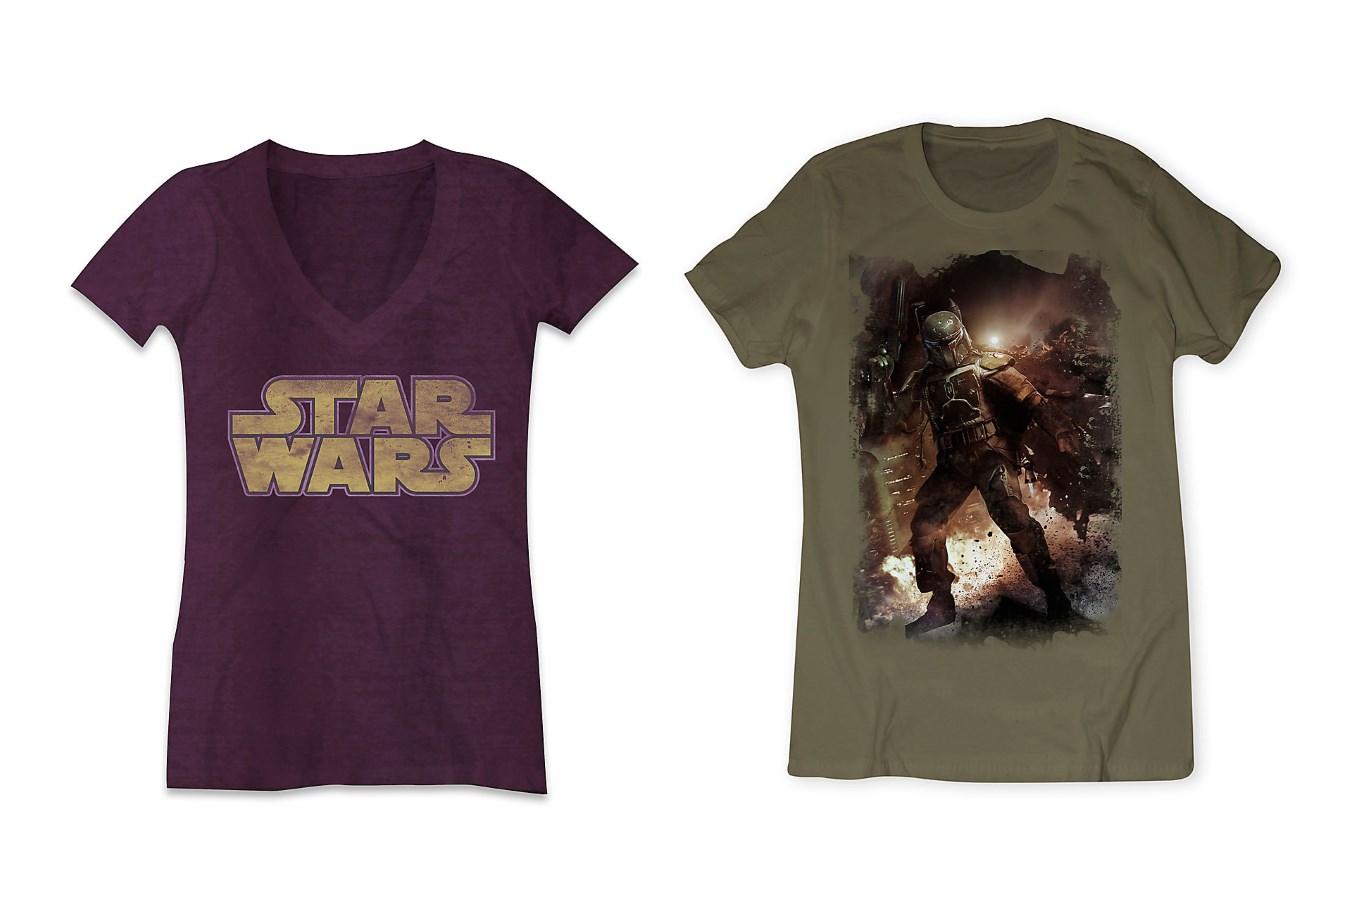 Limited release tees at Disney Store